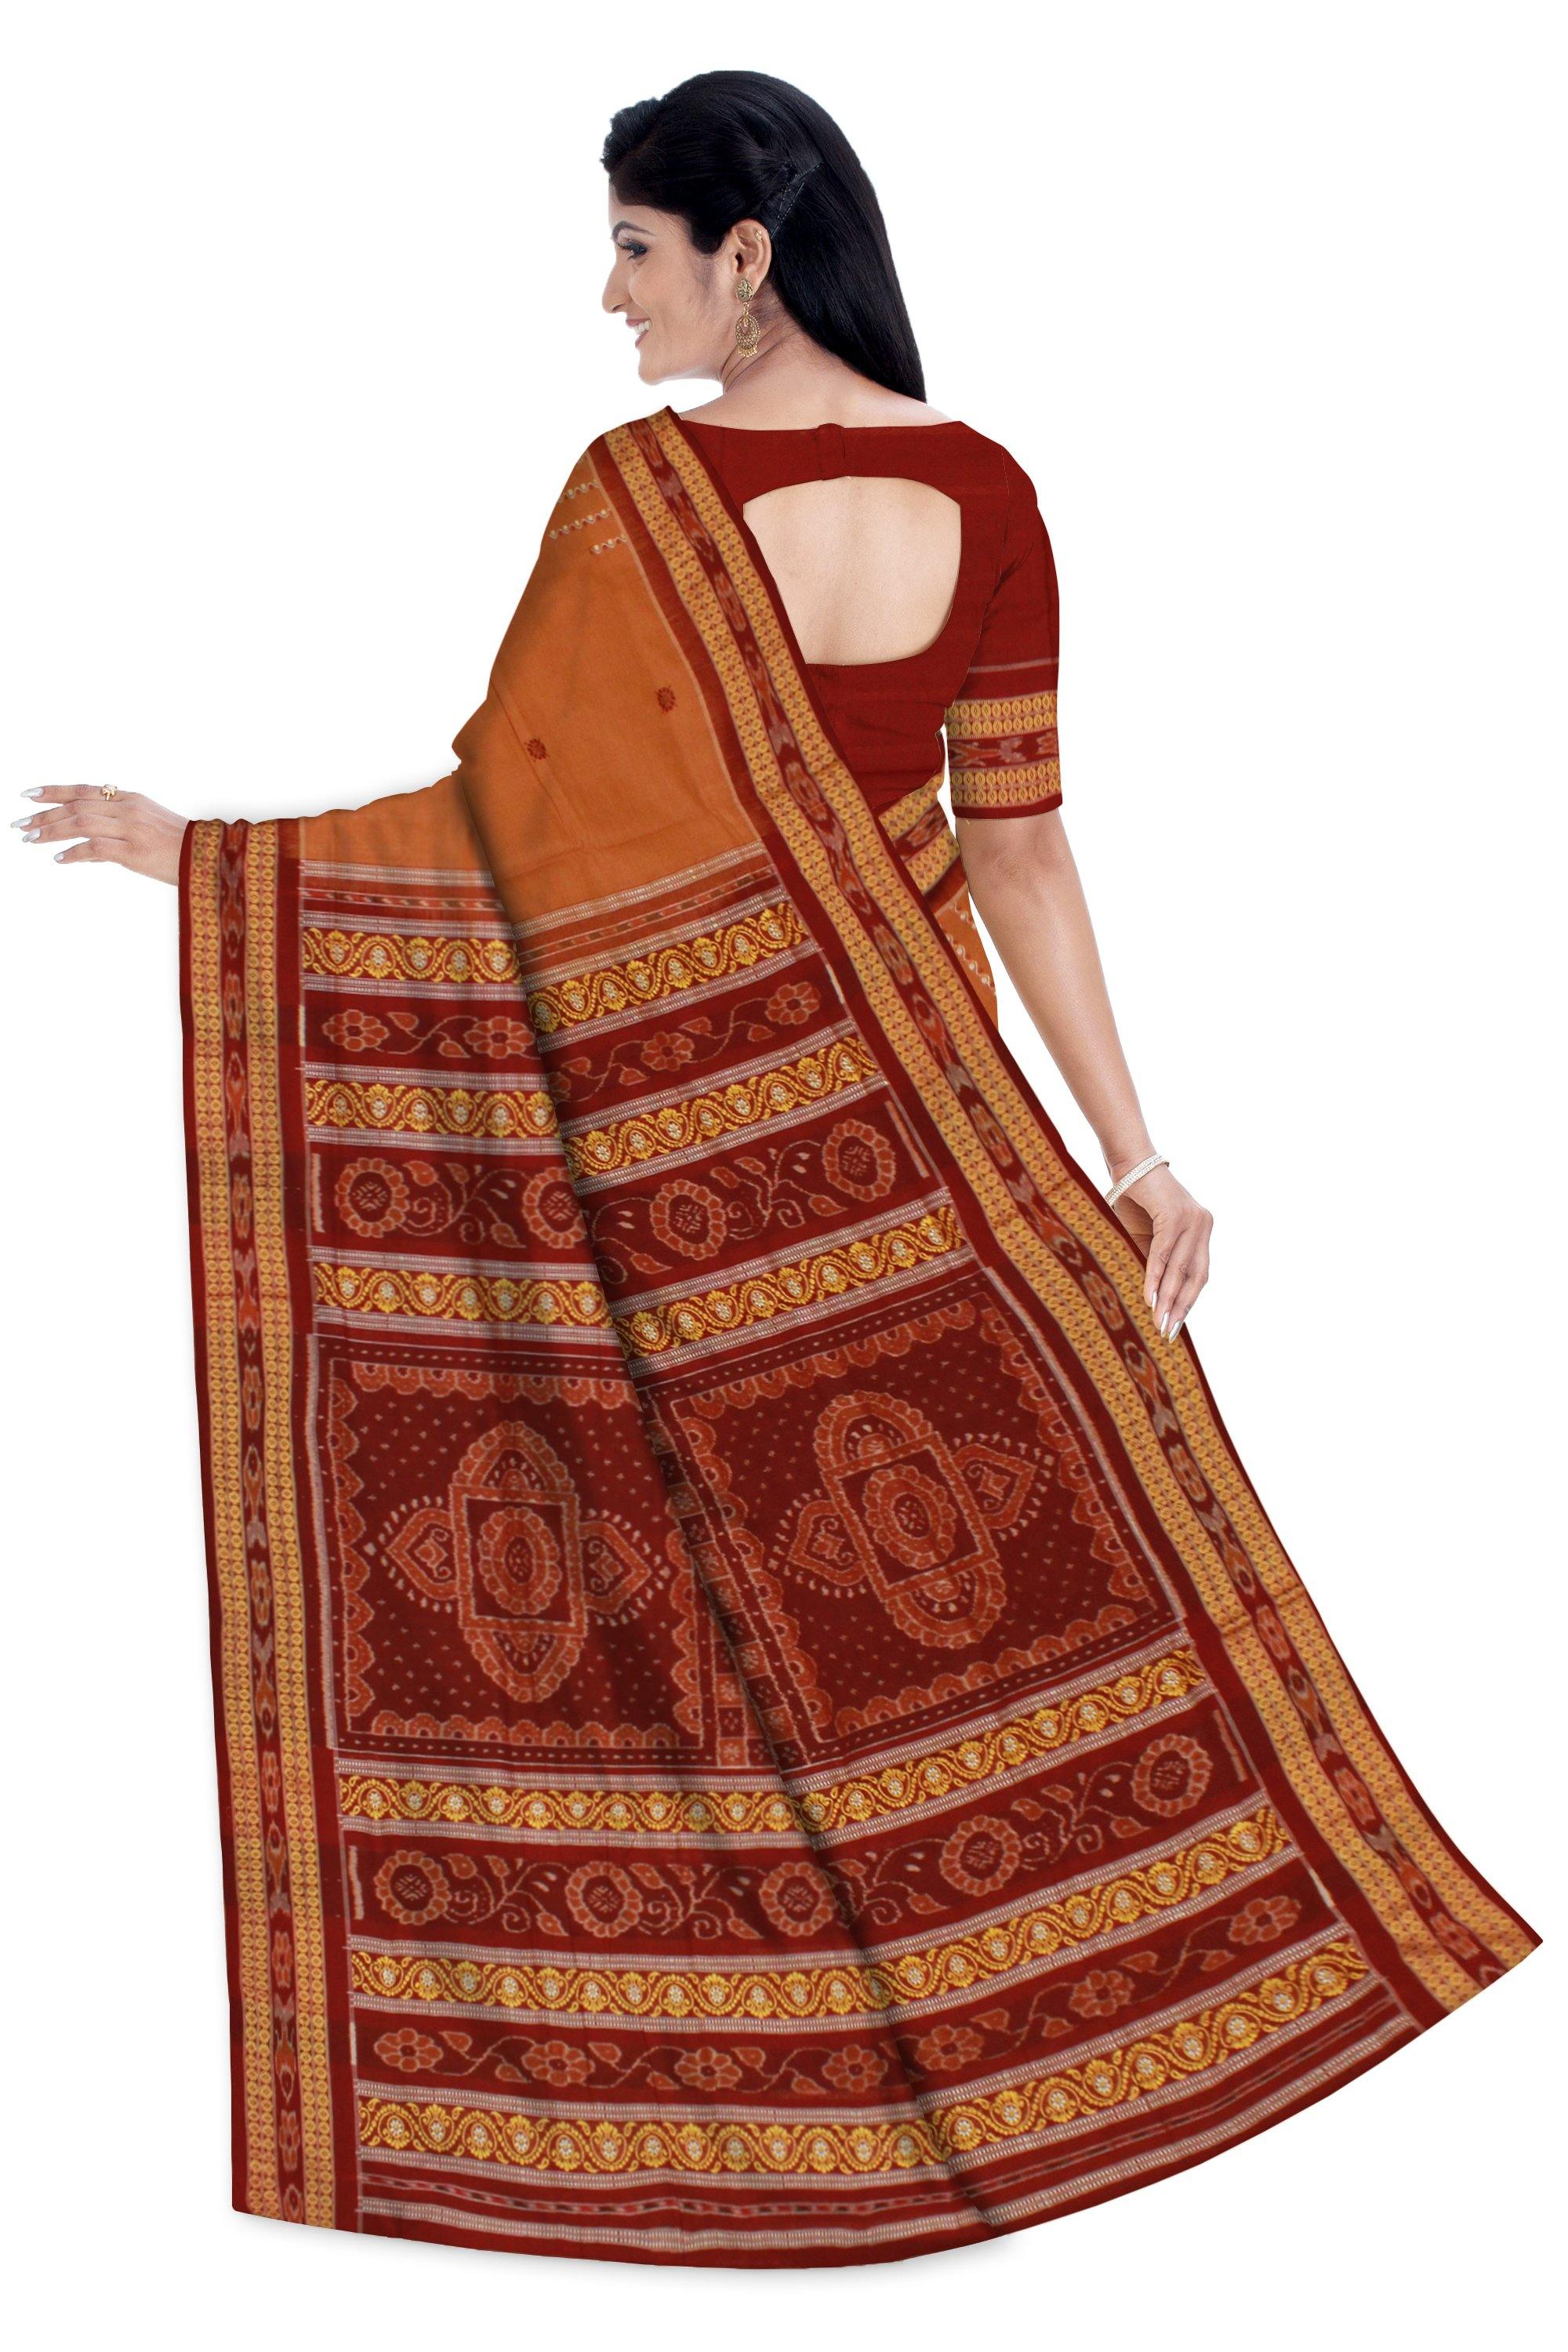 Exclusive Handwoven Sambalpuri Lining Bomkei pattern saree in  Brown and Light Maroon color (with blouse piece) - Koshali Arts & Crafts Enterprise